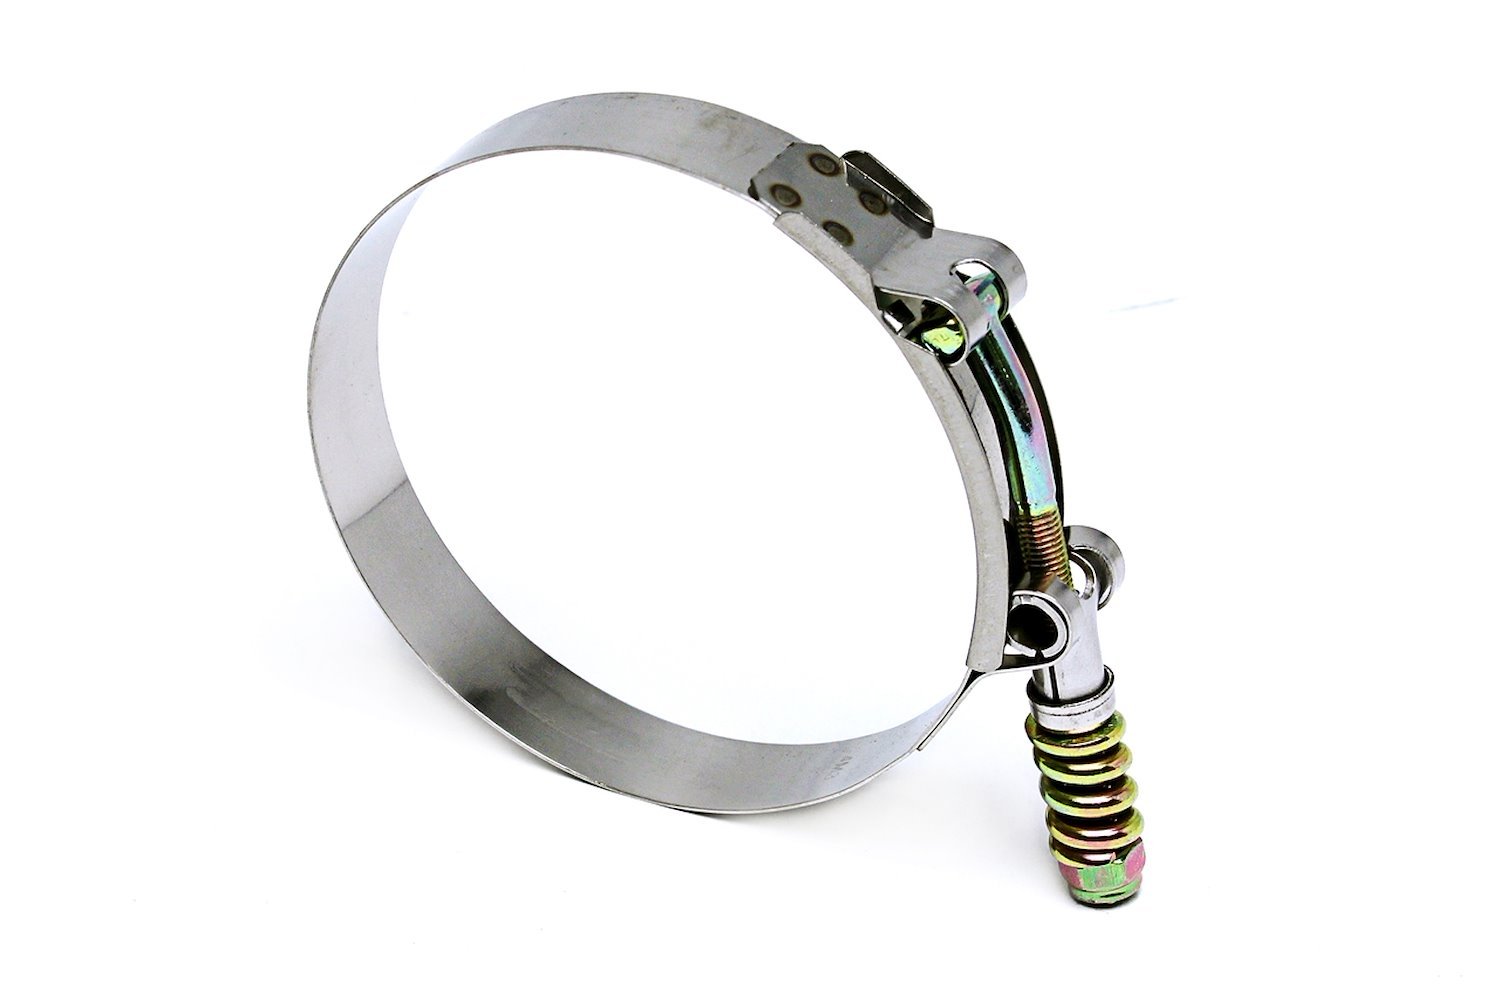 SLTC-725 Stainless Steel Spring Loaded T-Bolt Hose Clamp, Size #204, Range: 7.25 in.-7.56 in.